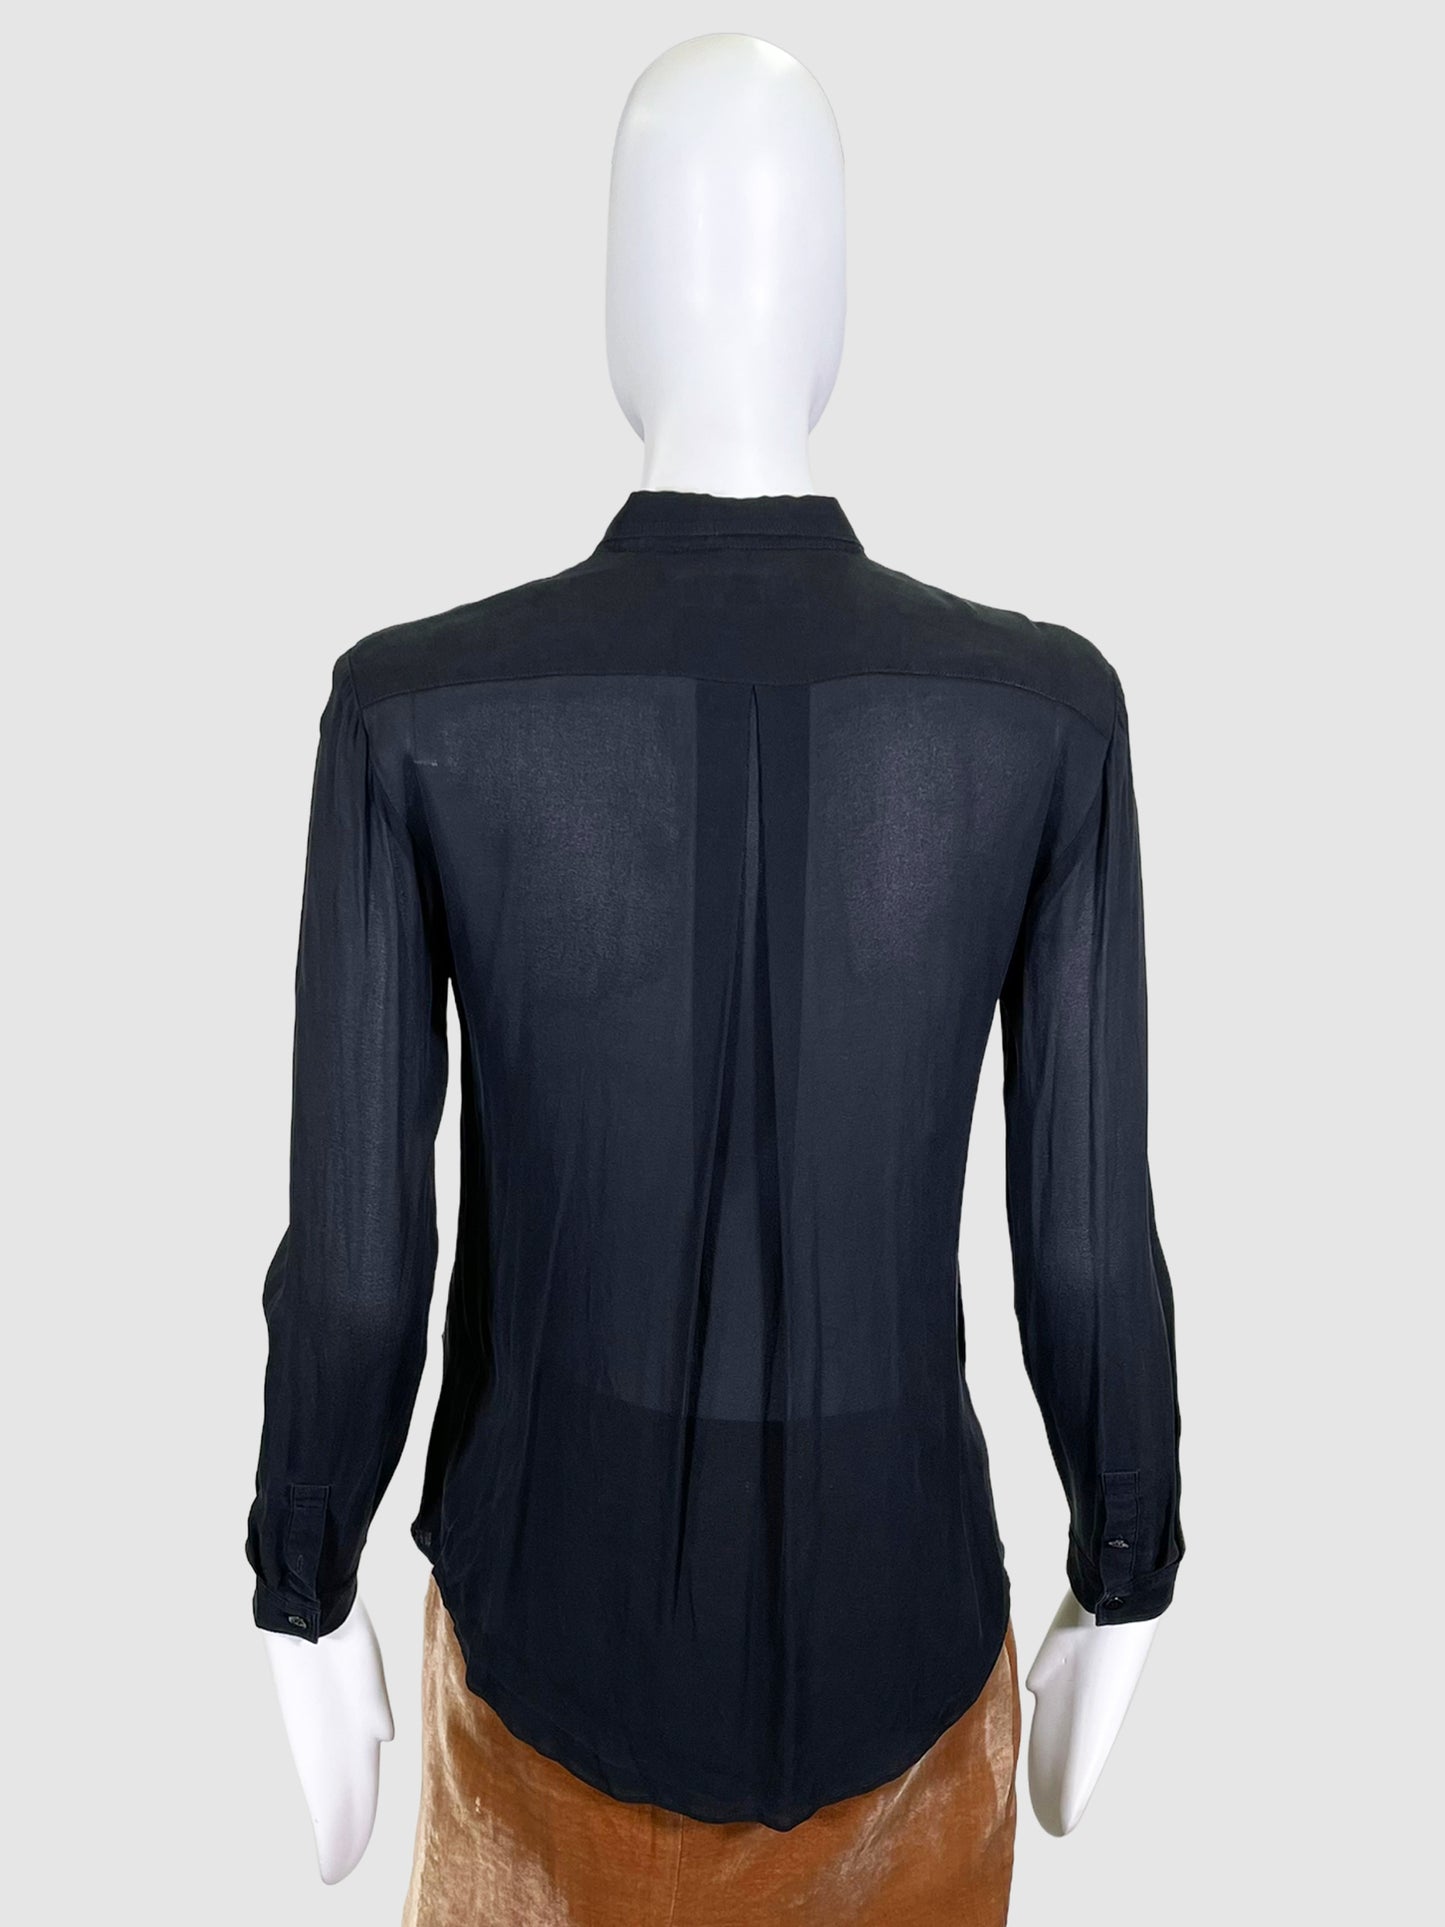 Burberry Sheer Blouse - Size 4